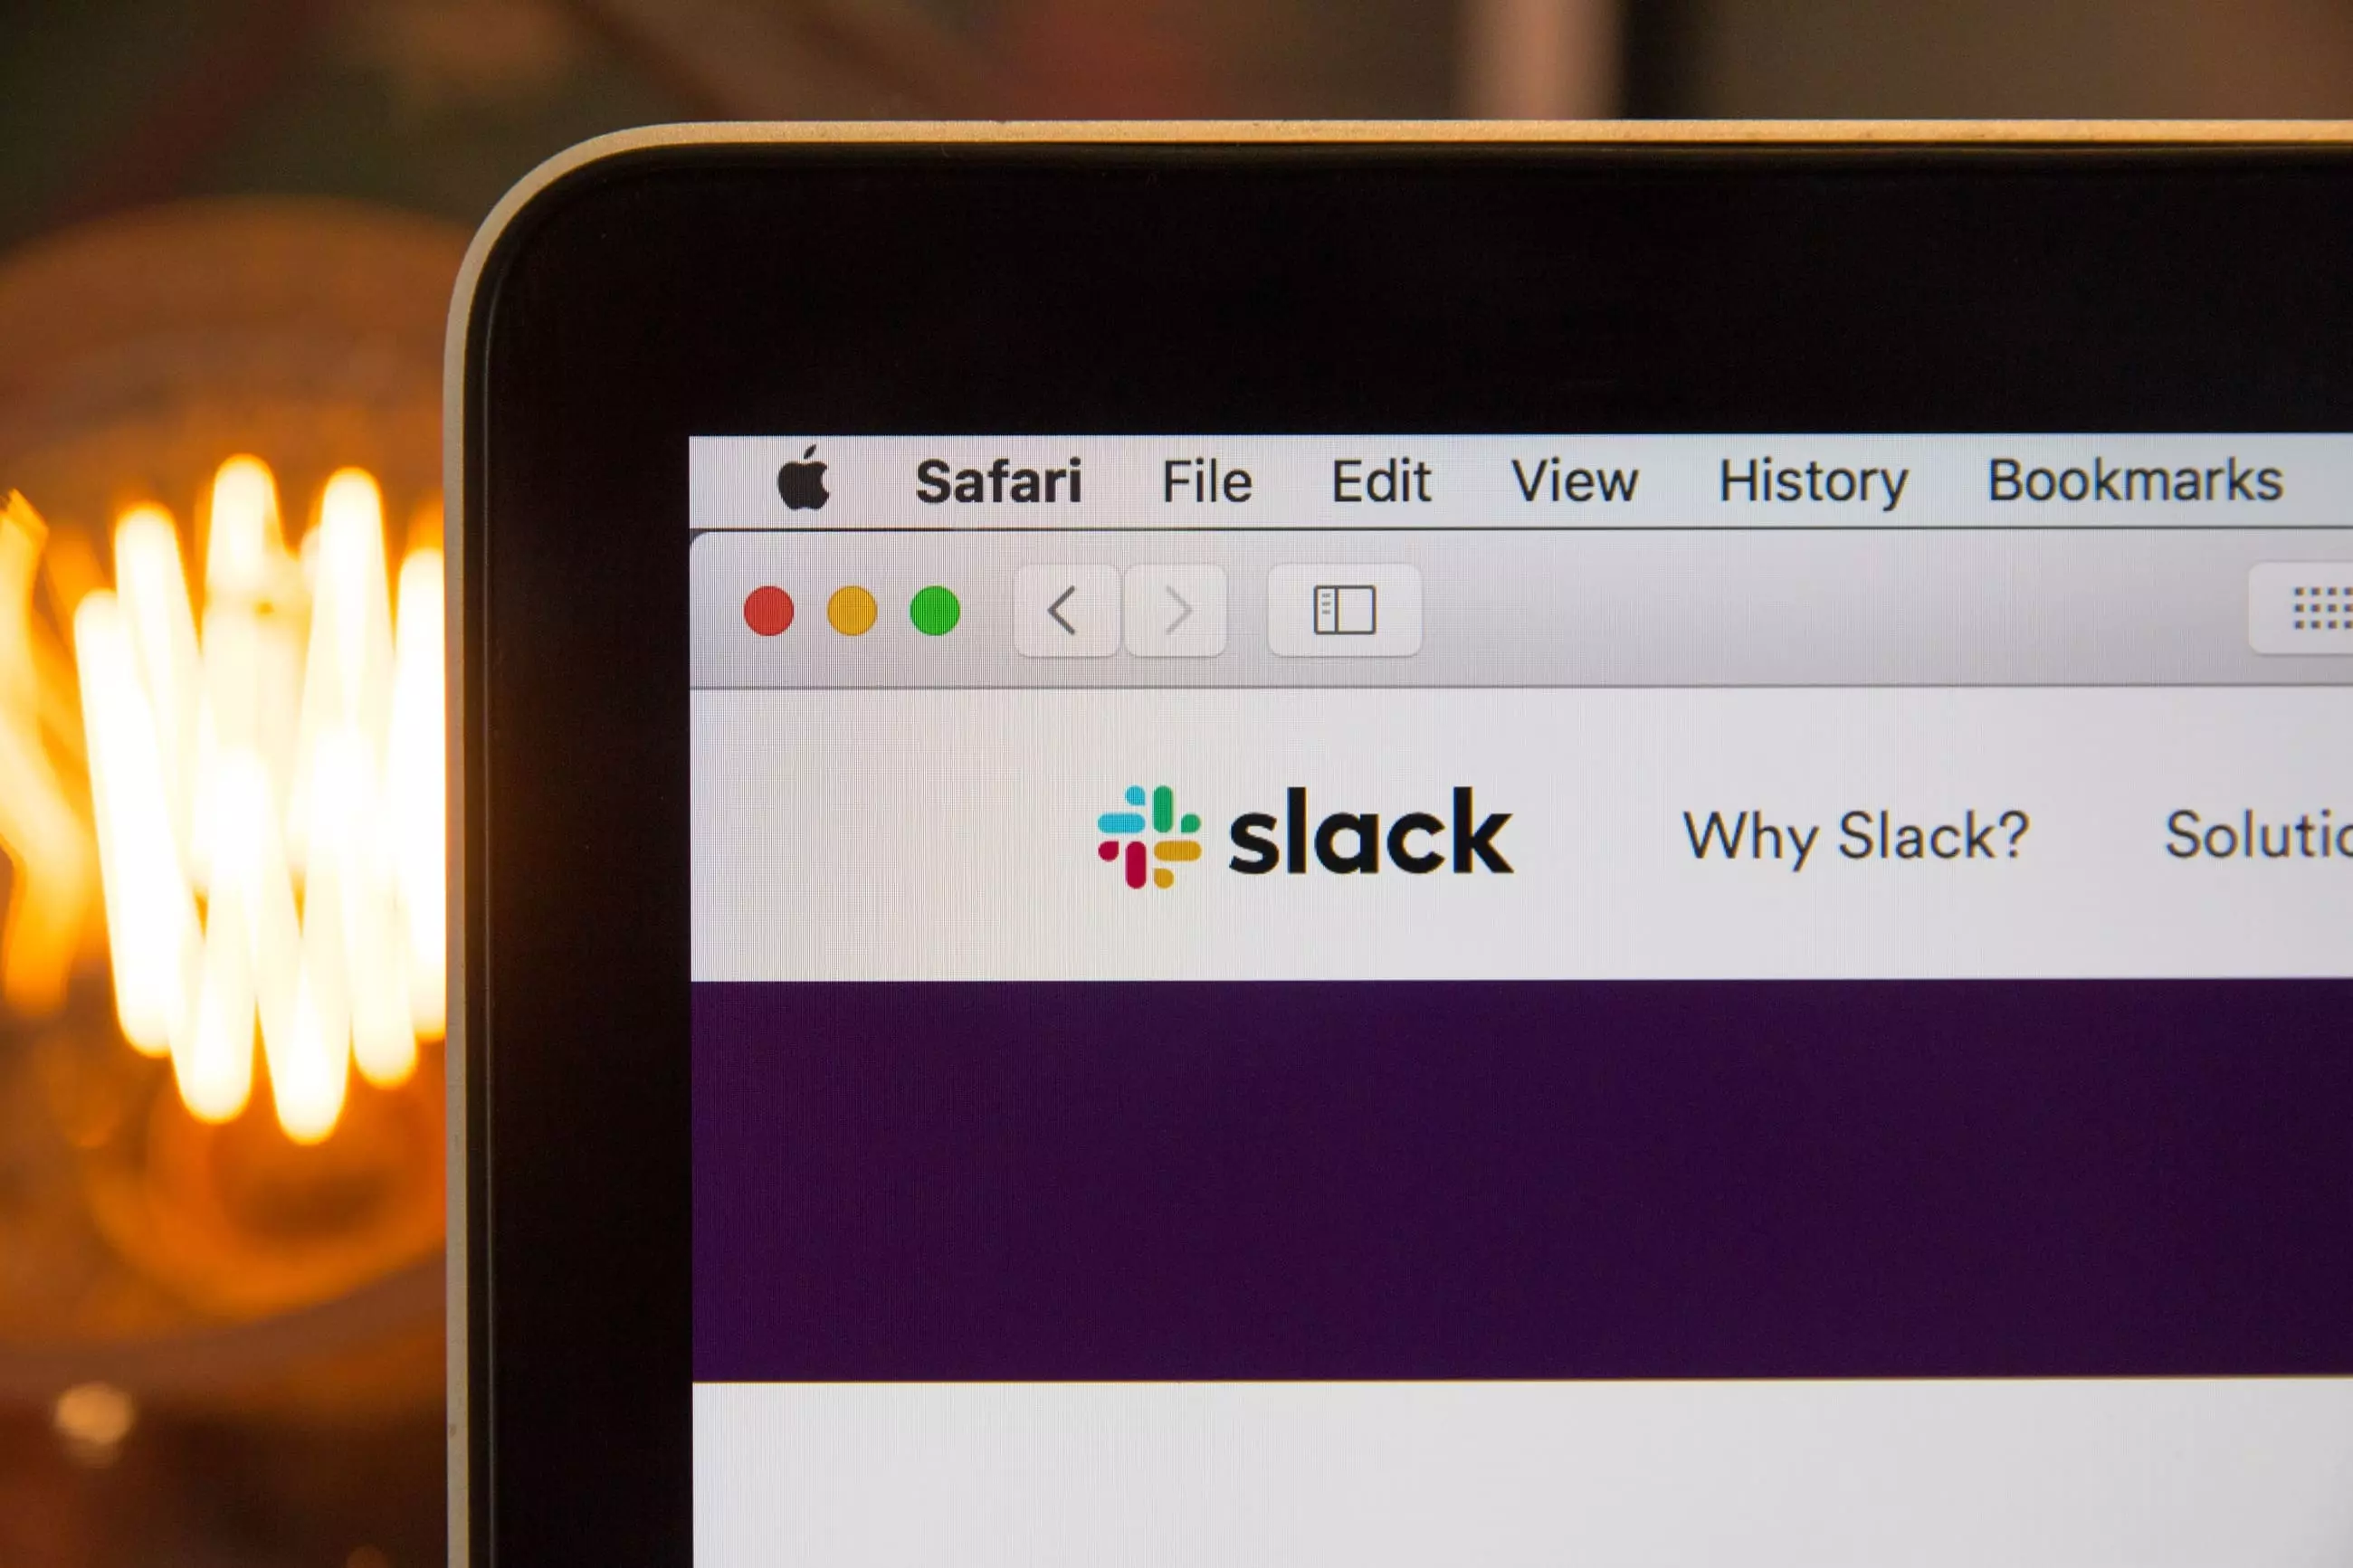 How to receive alerts in Slack when a website changes